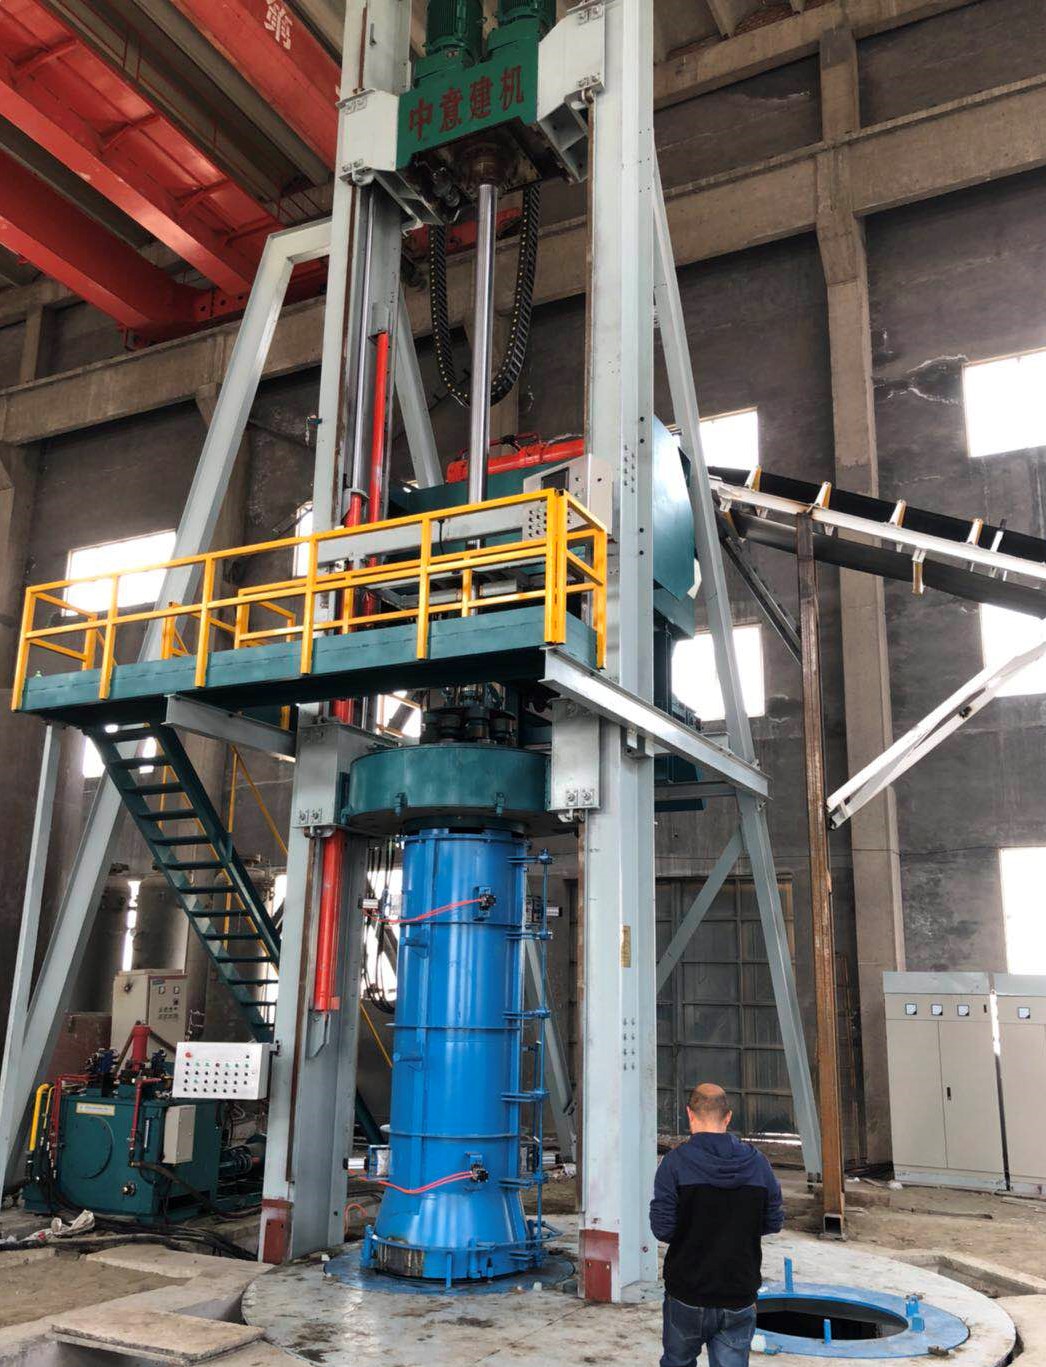 Radial extrusion pipe making equipment used in Qingdao three Xin Technology